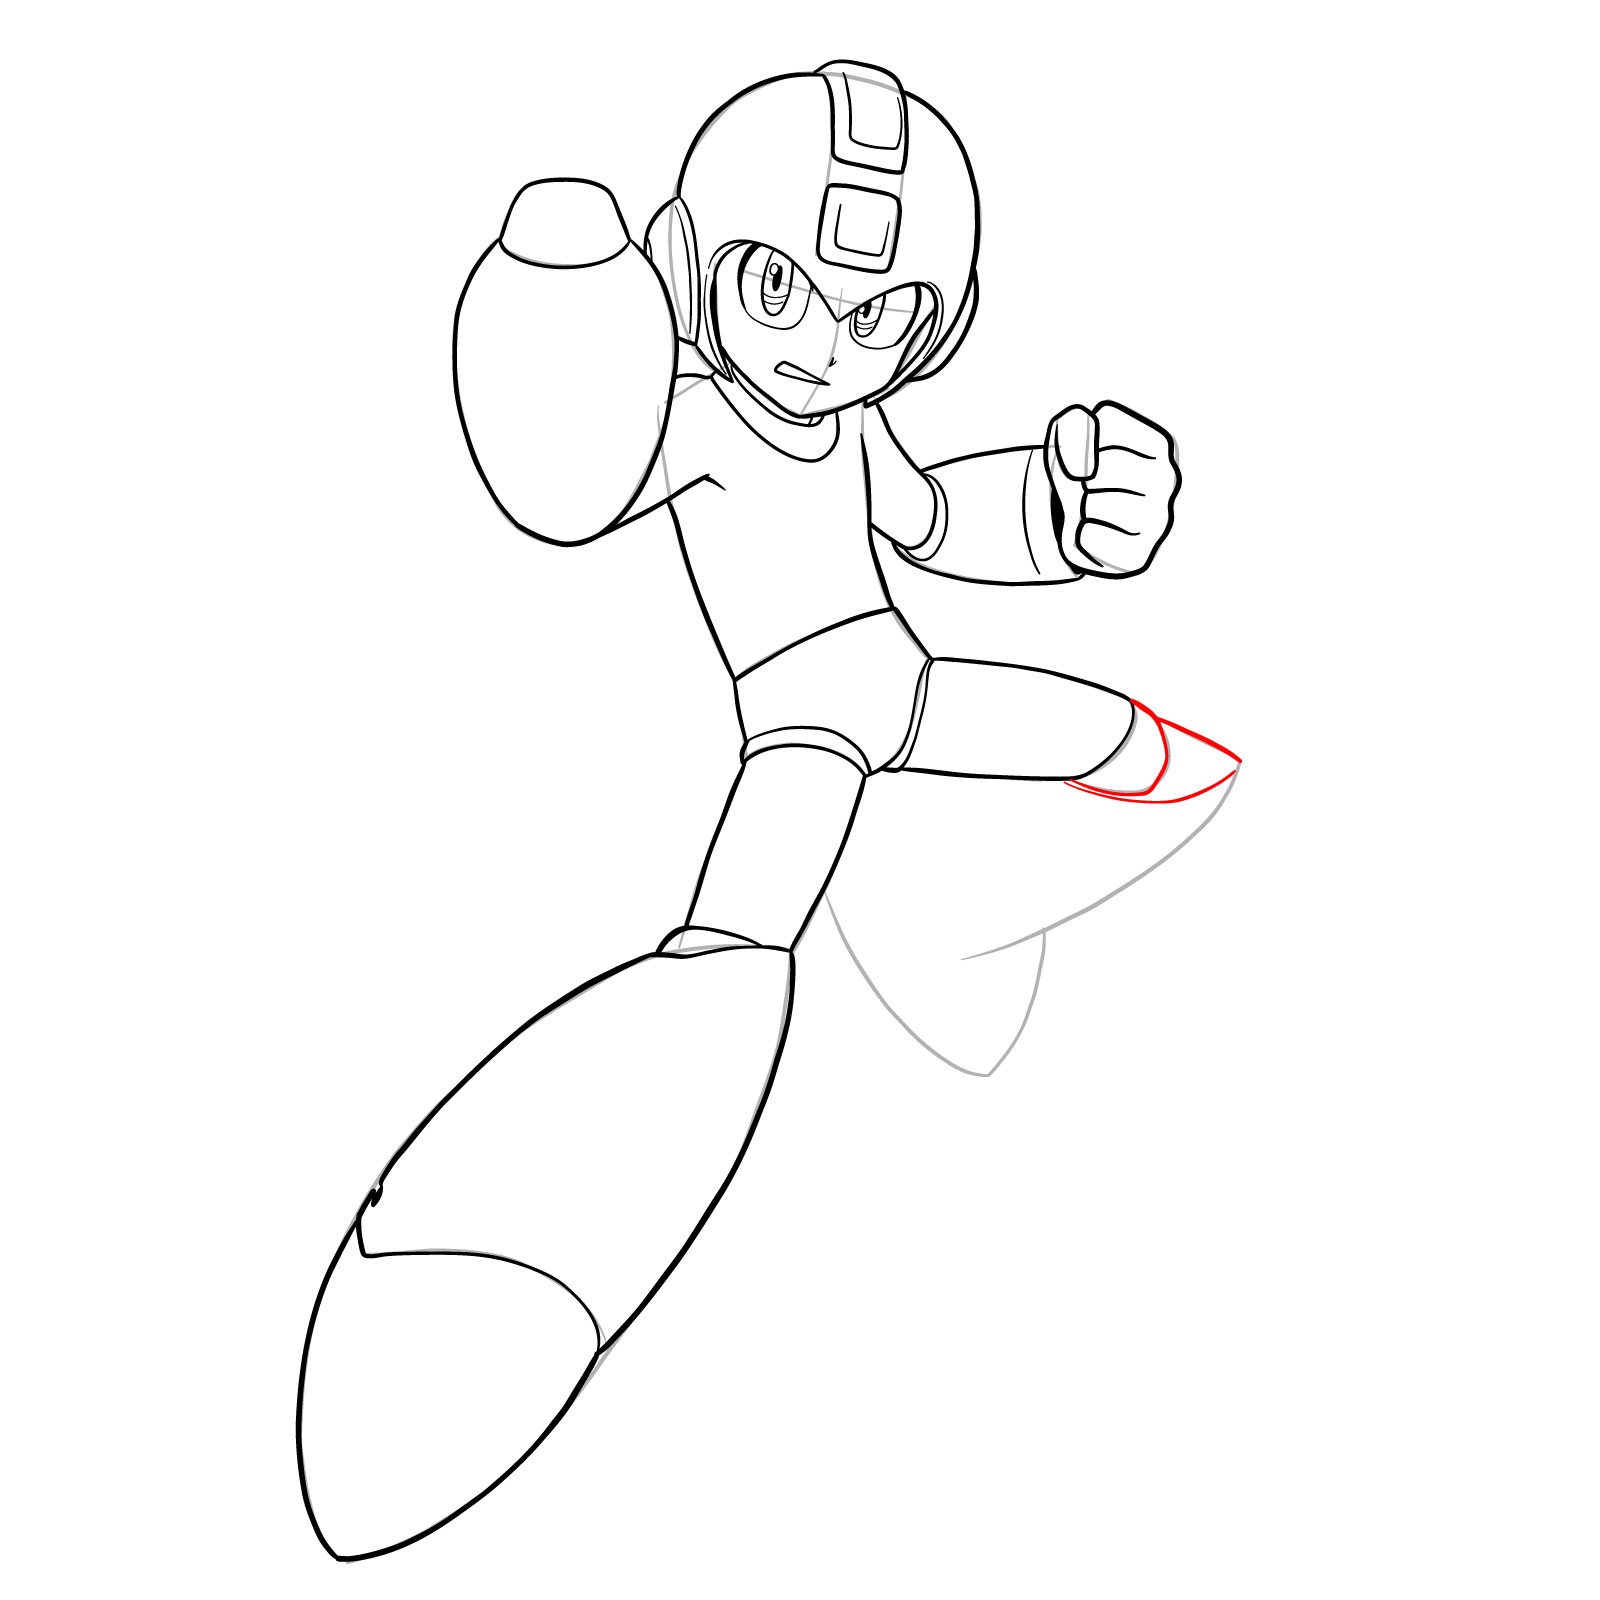 How to draw Mega Man from the 11th game - step 26